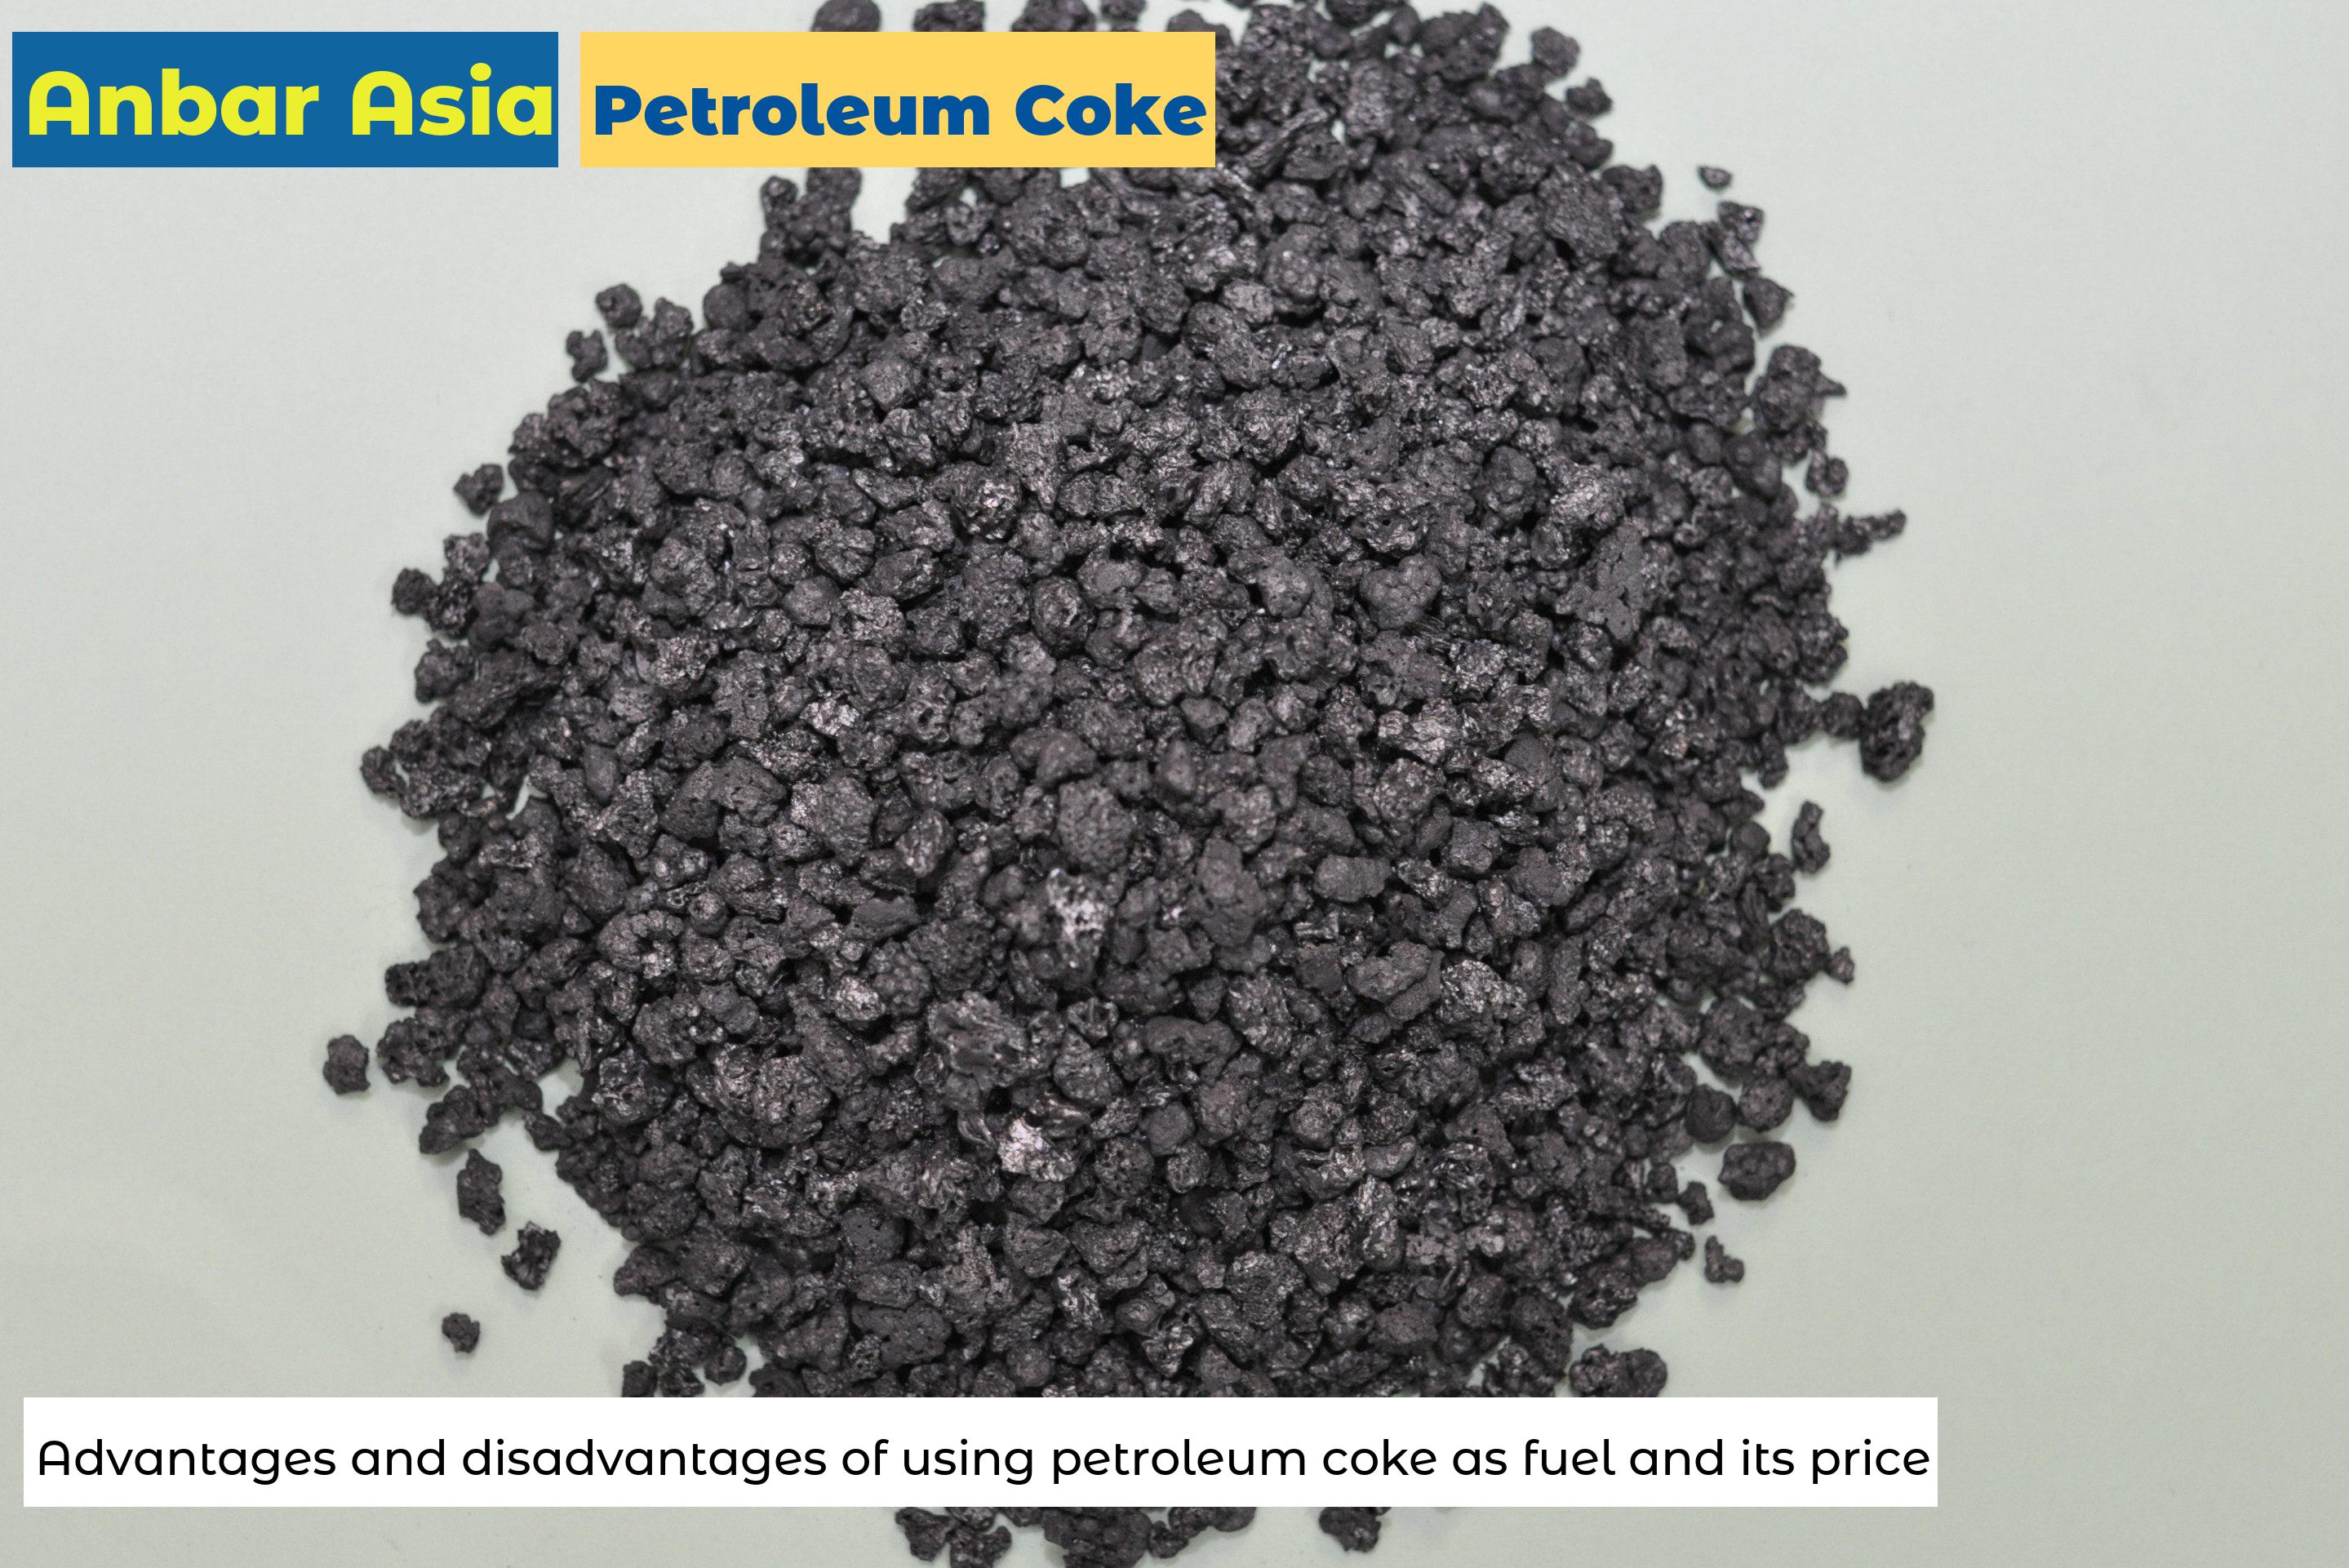 Advantages and disadvantages of using petroleum coke as fuel and its price